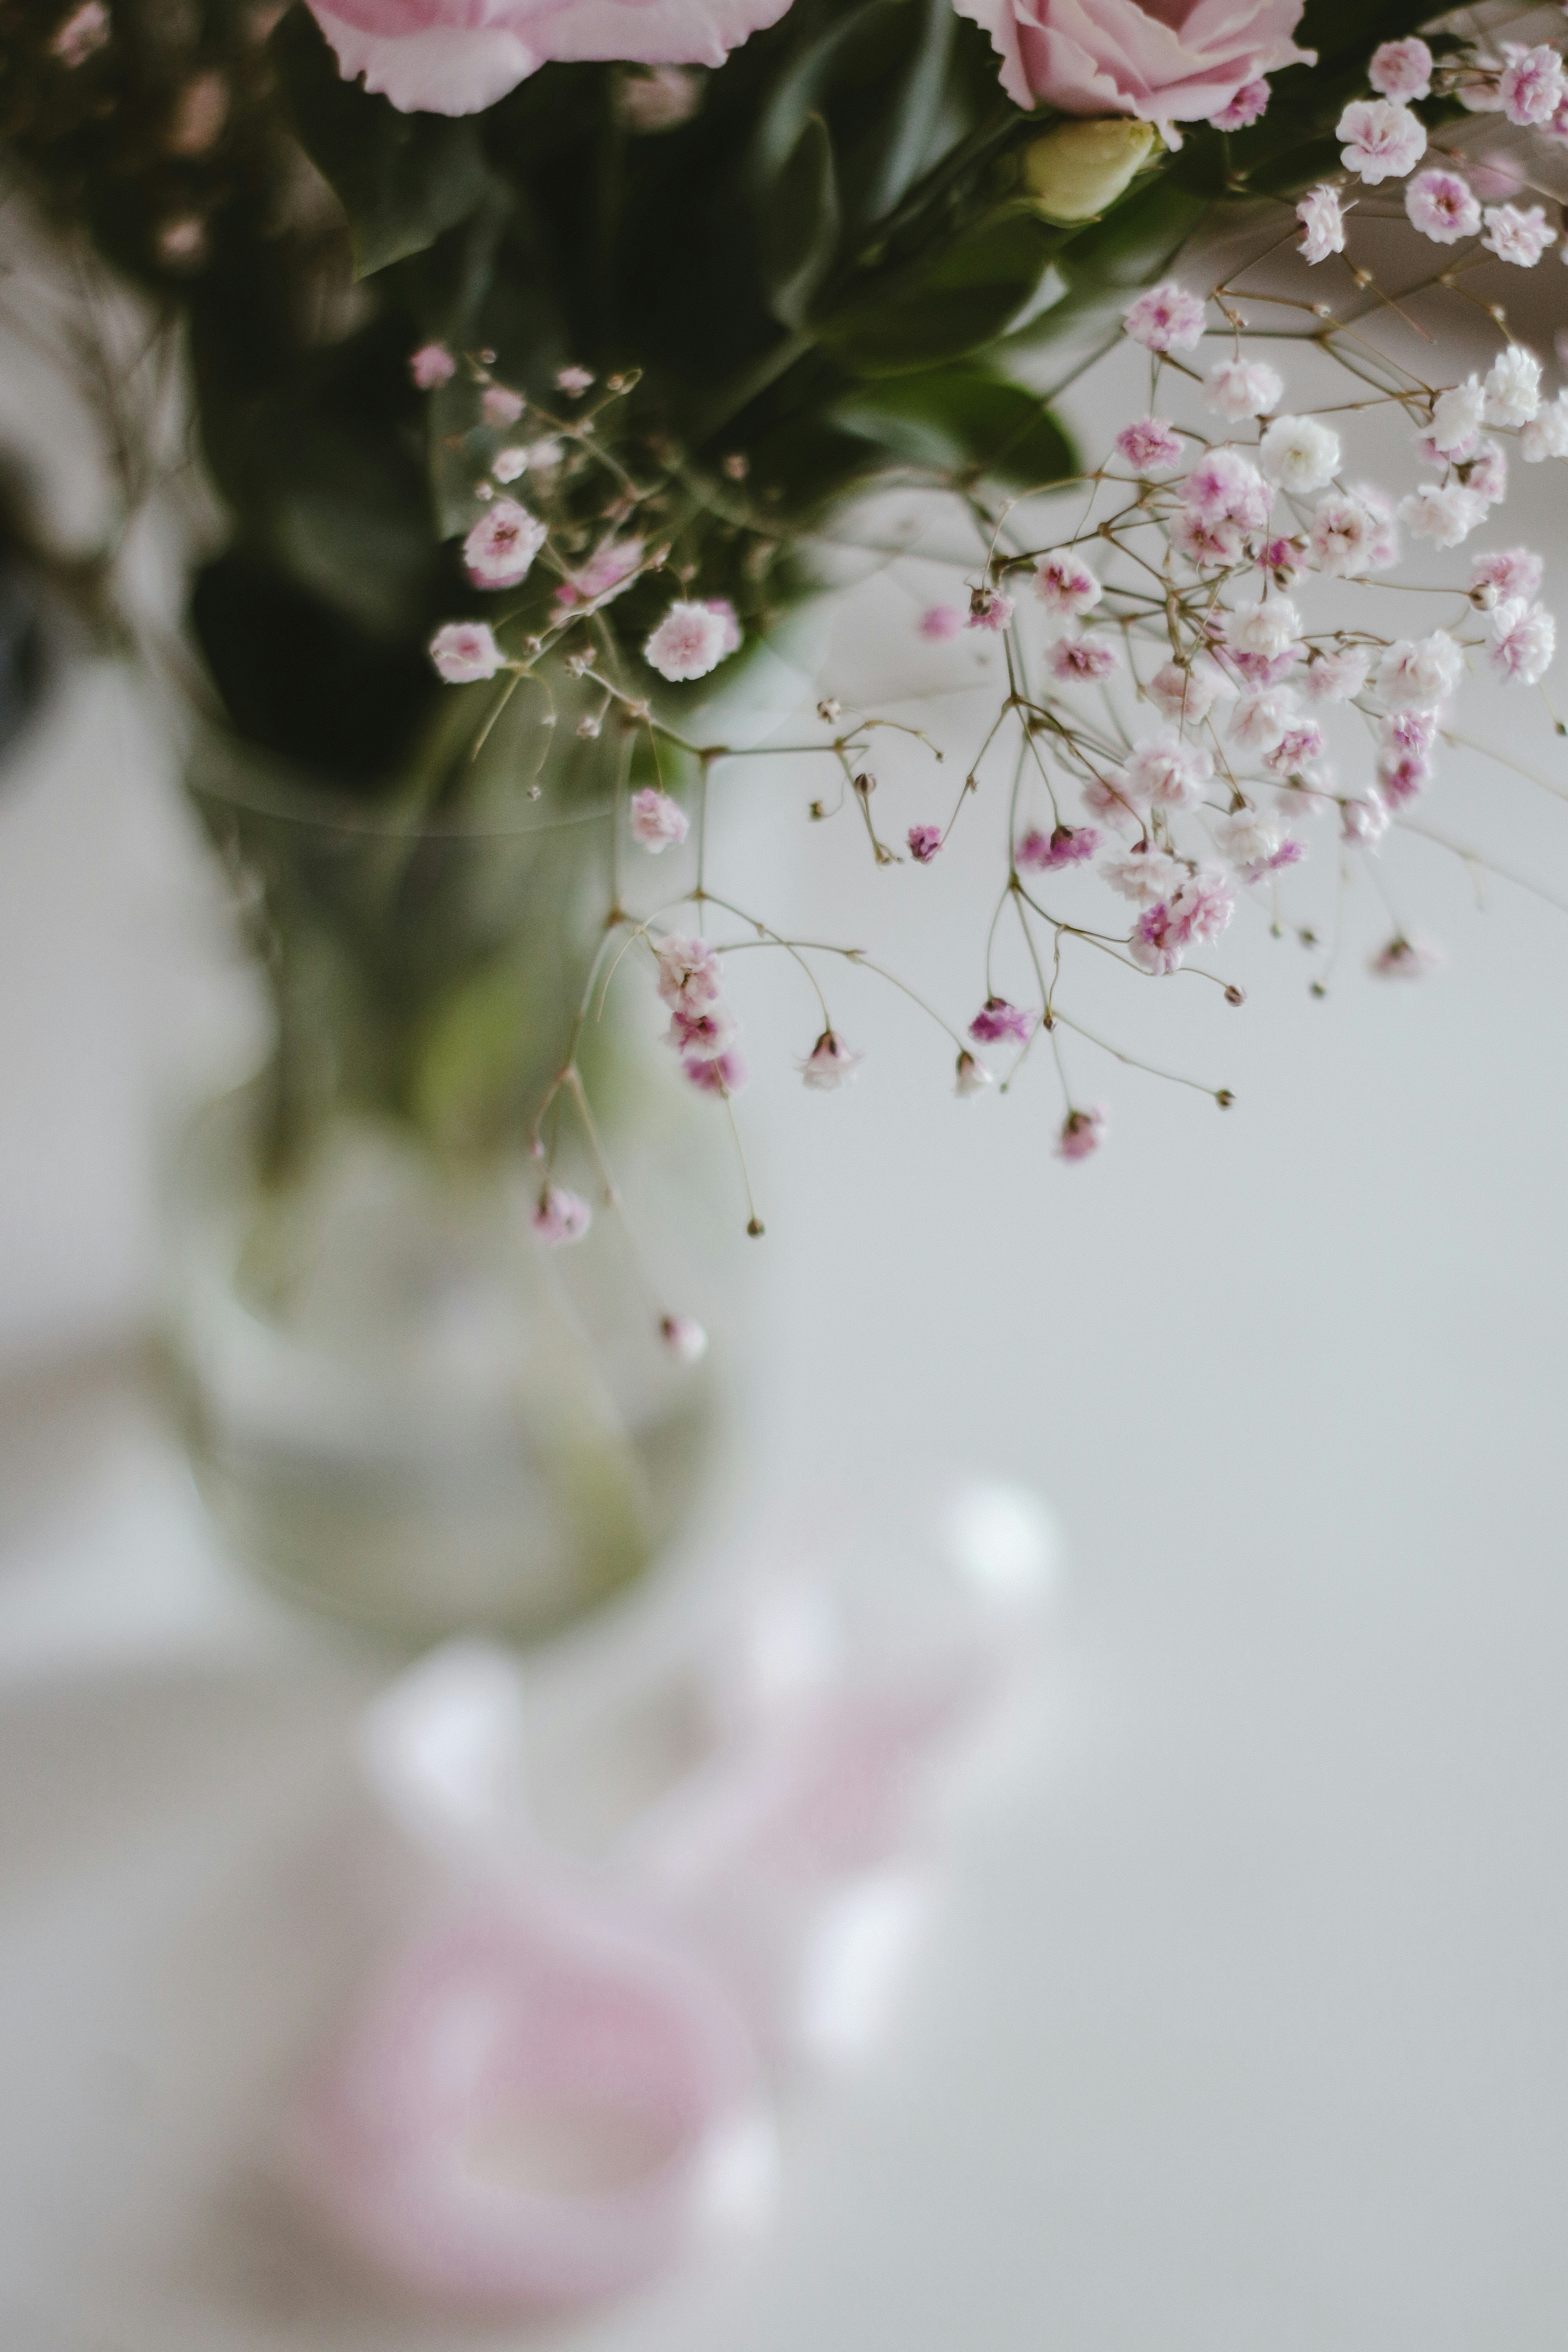 white and pink flowers in clear glass vase